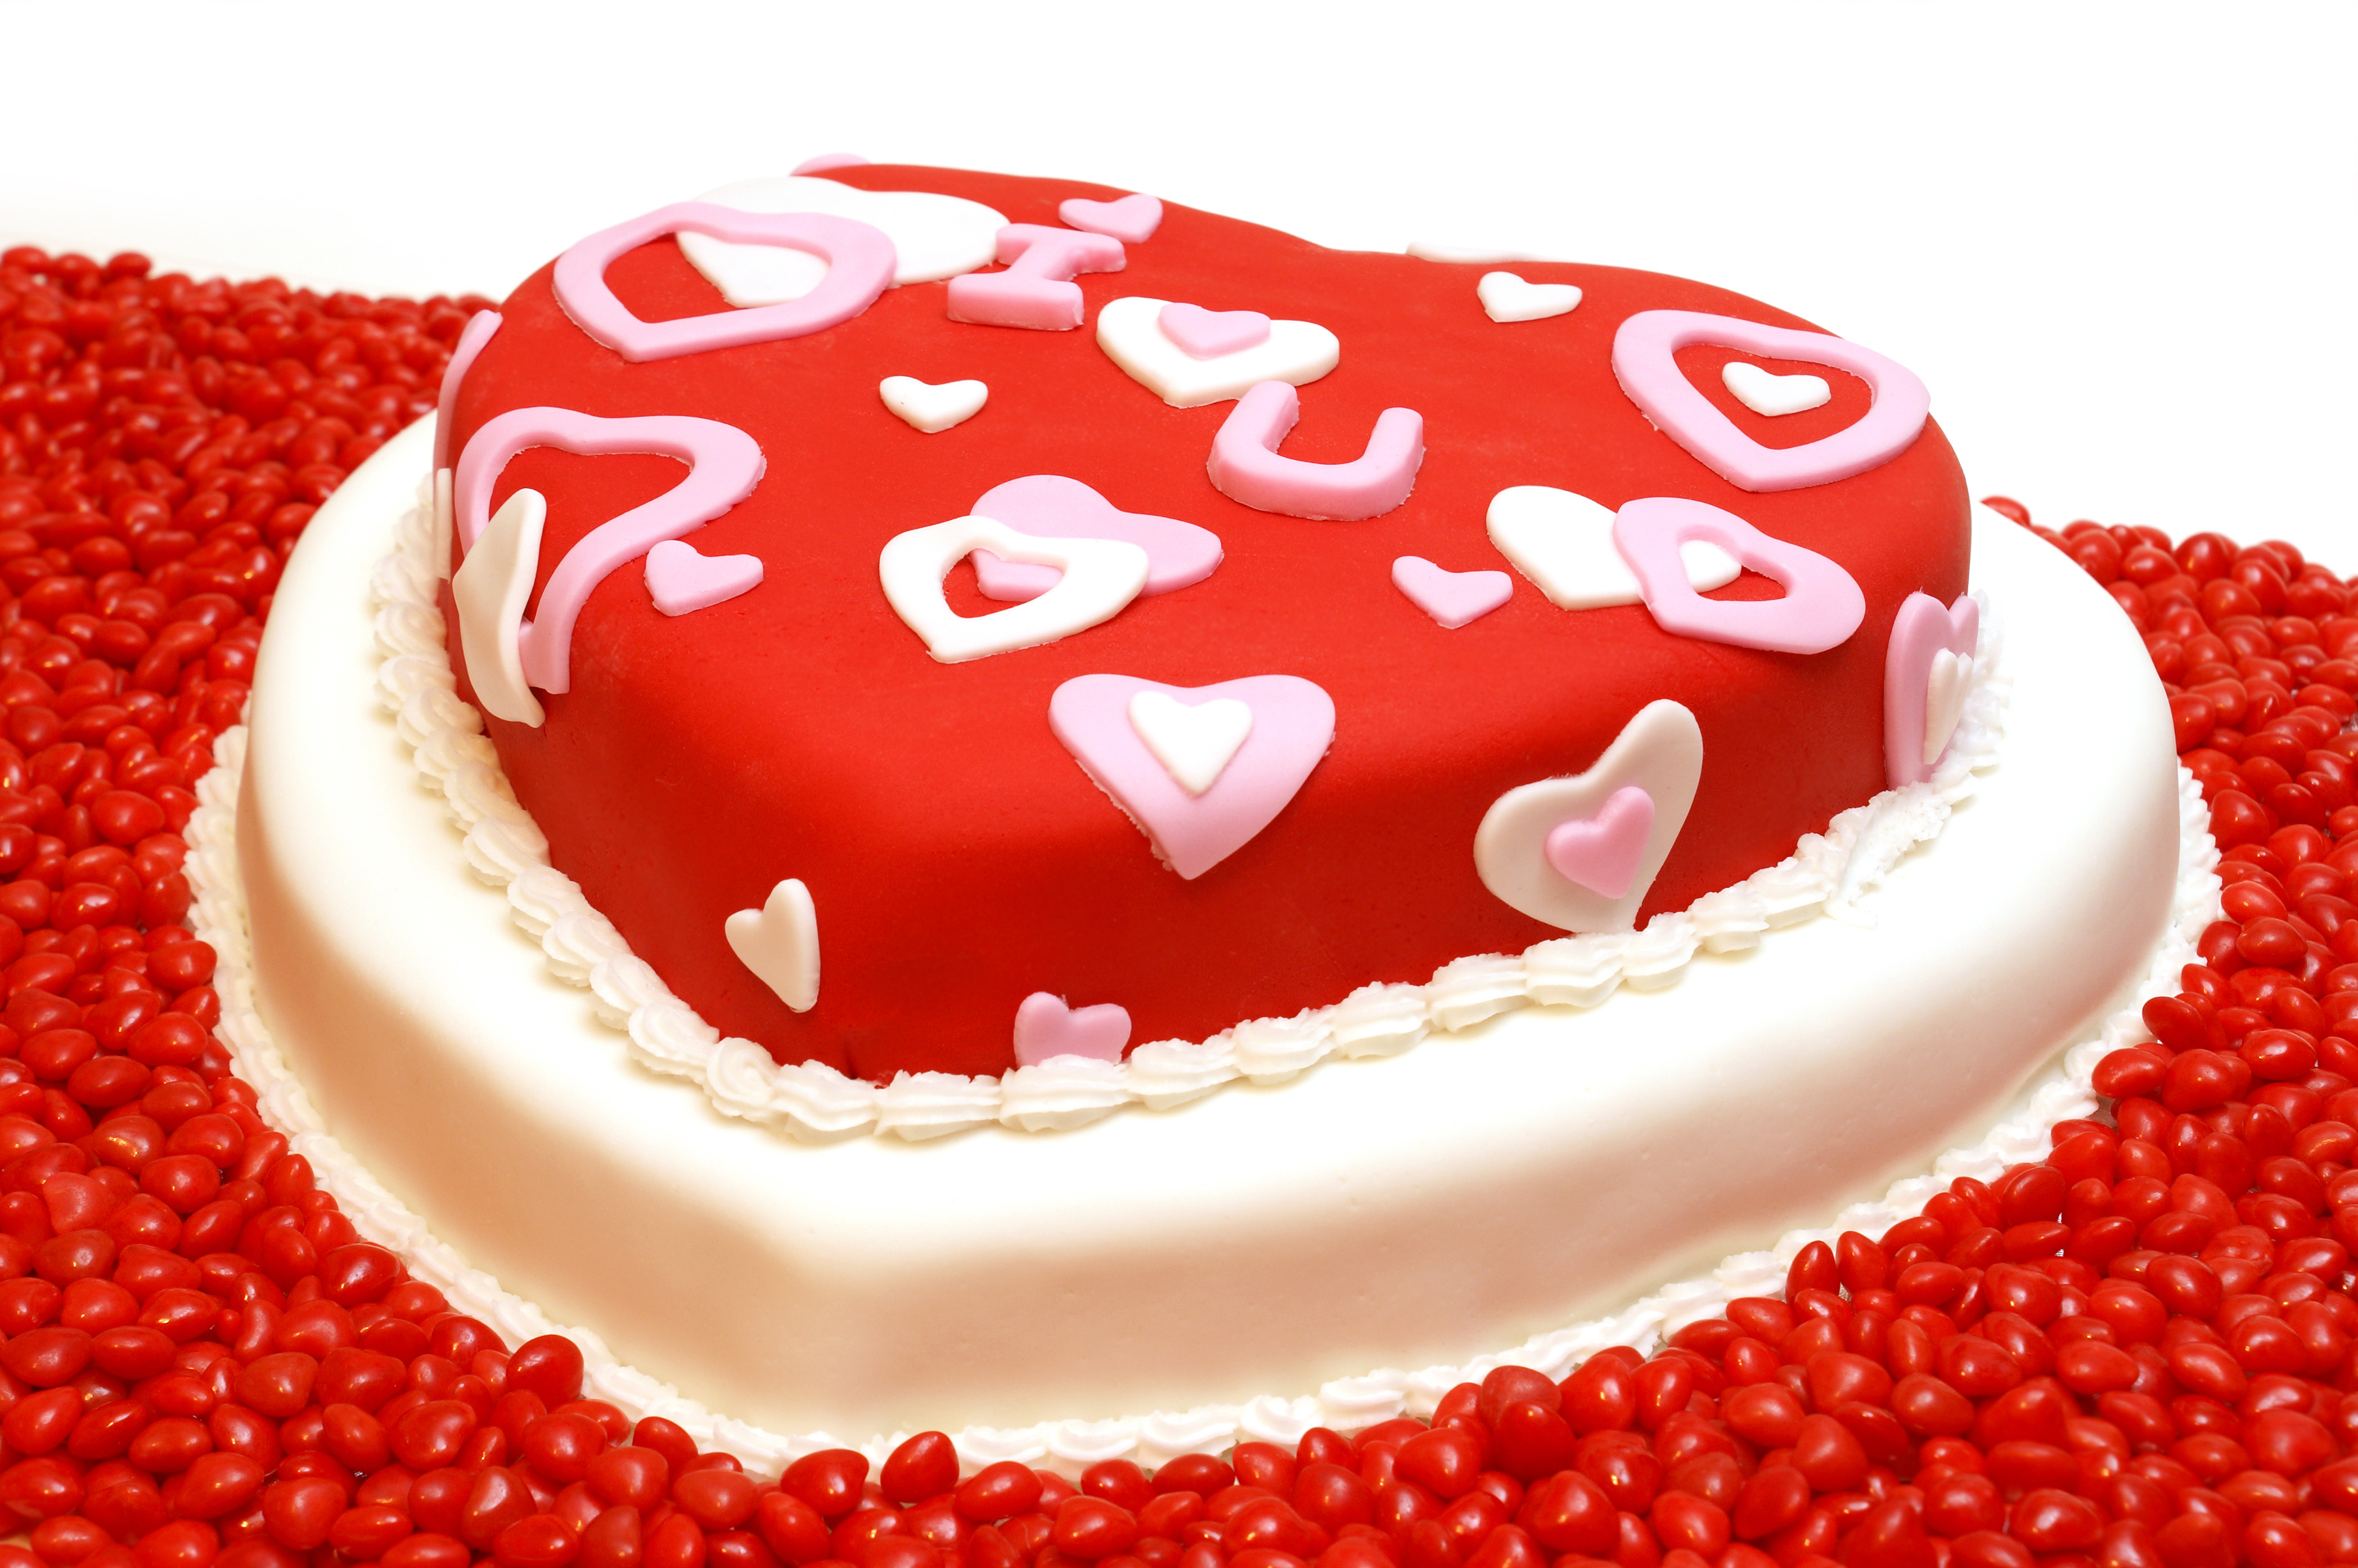 Cake Candy Heart Shaped Pastry Valentine 039 S Day 3300x2195